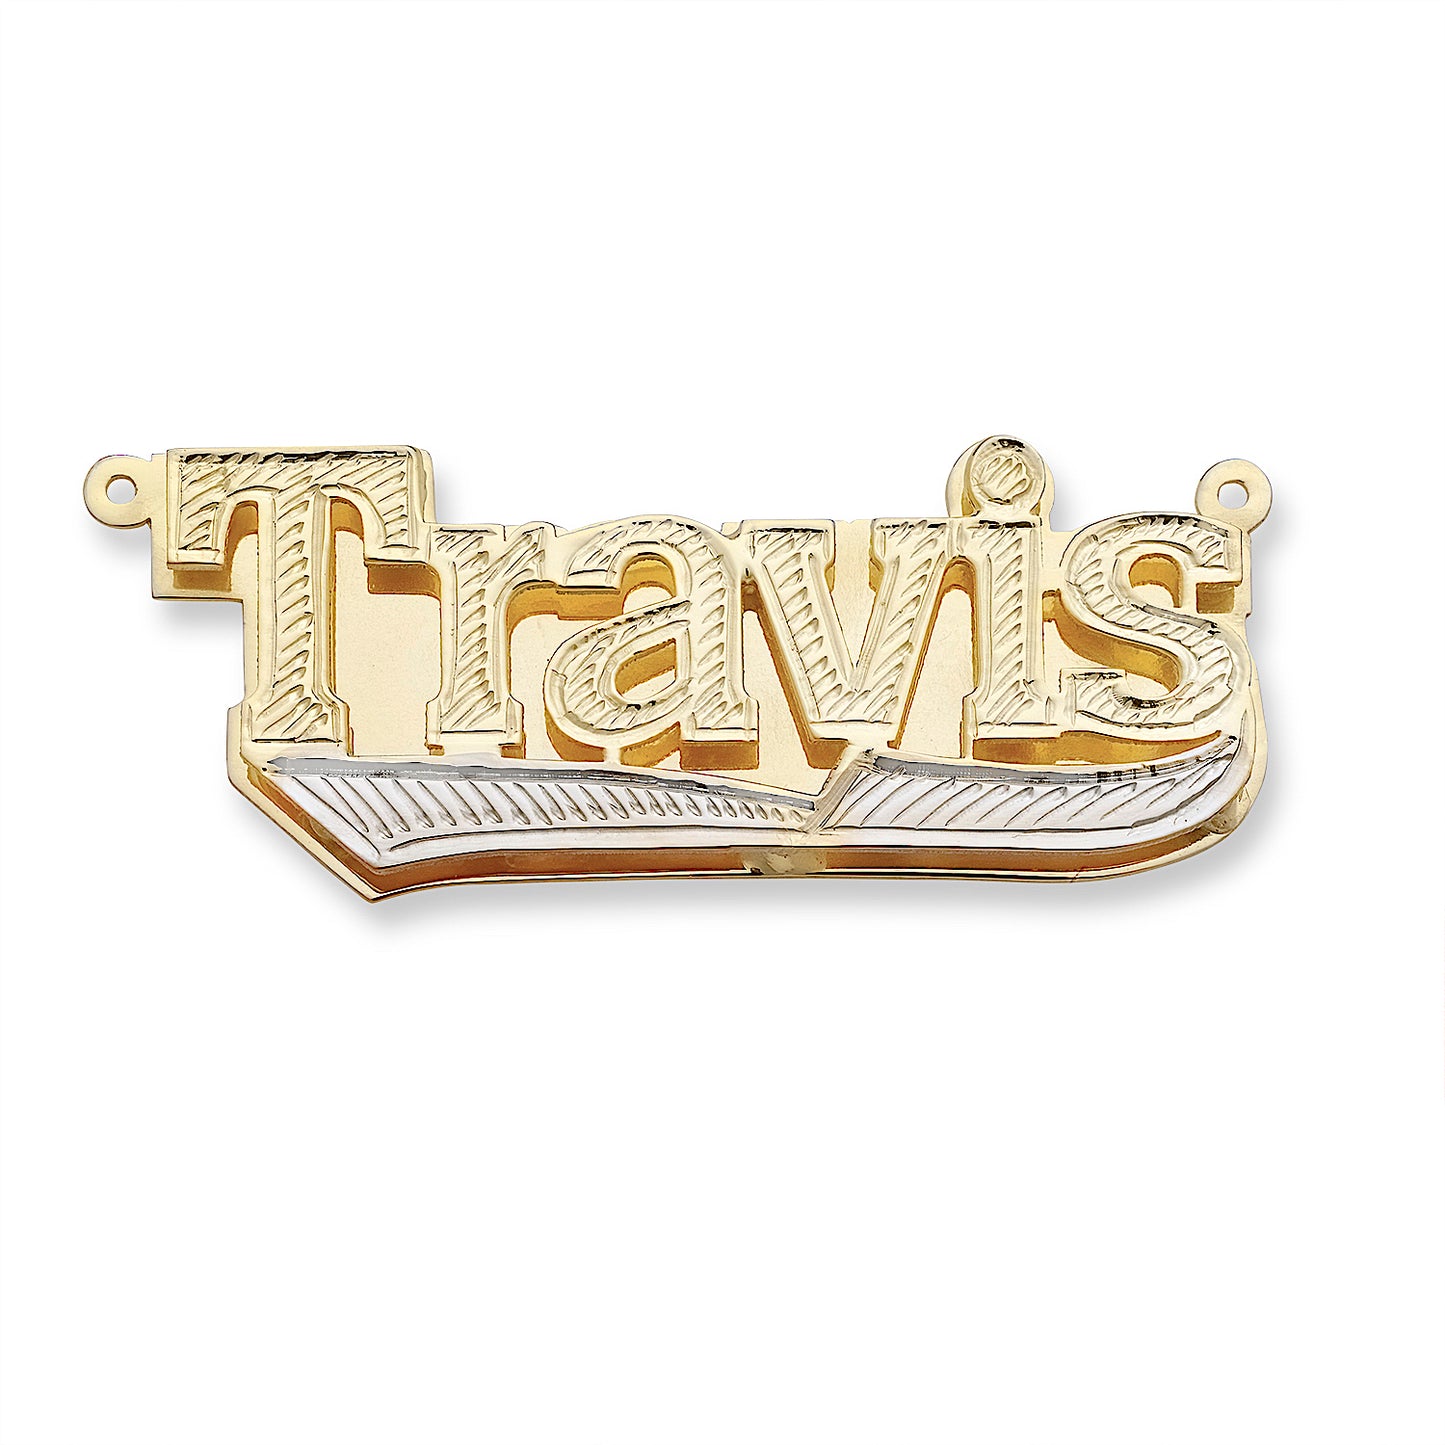 Better Jewelry 10K Gold Double Nameplate Necklace